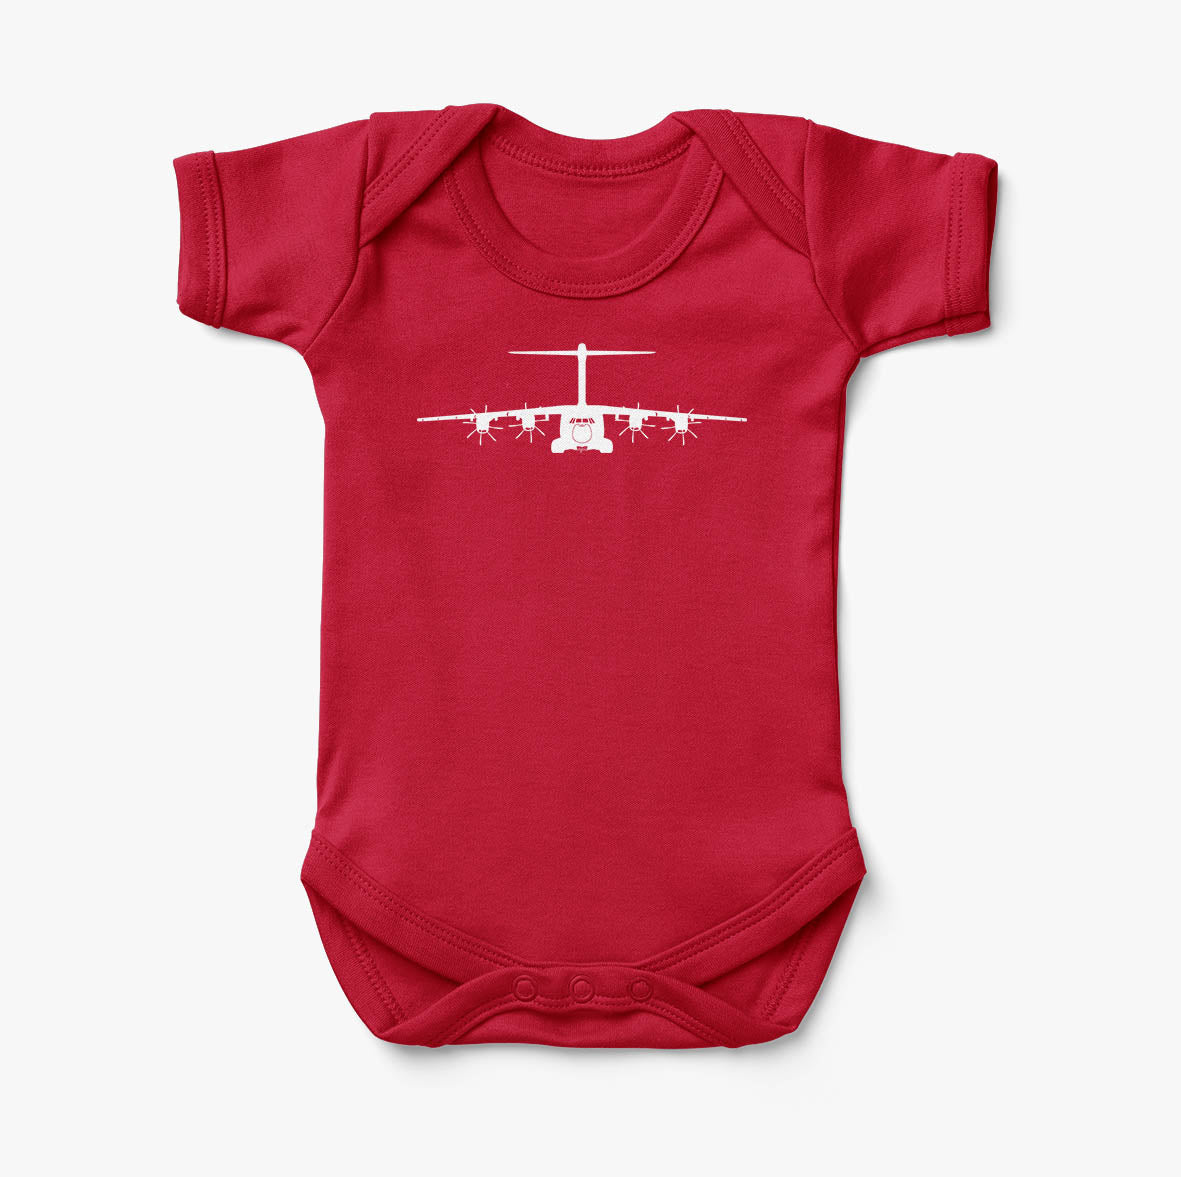 Airbus A400M Silhouette Designed Baby Bodysuits